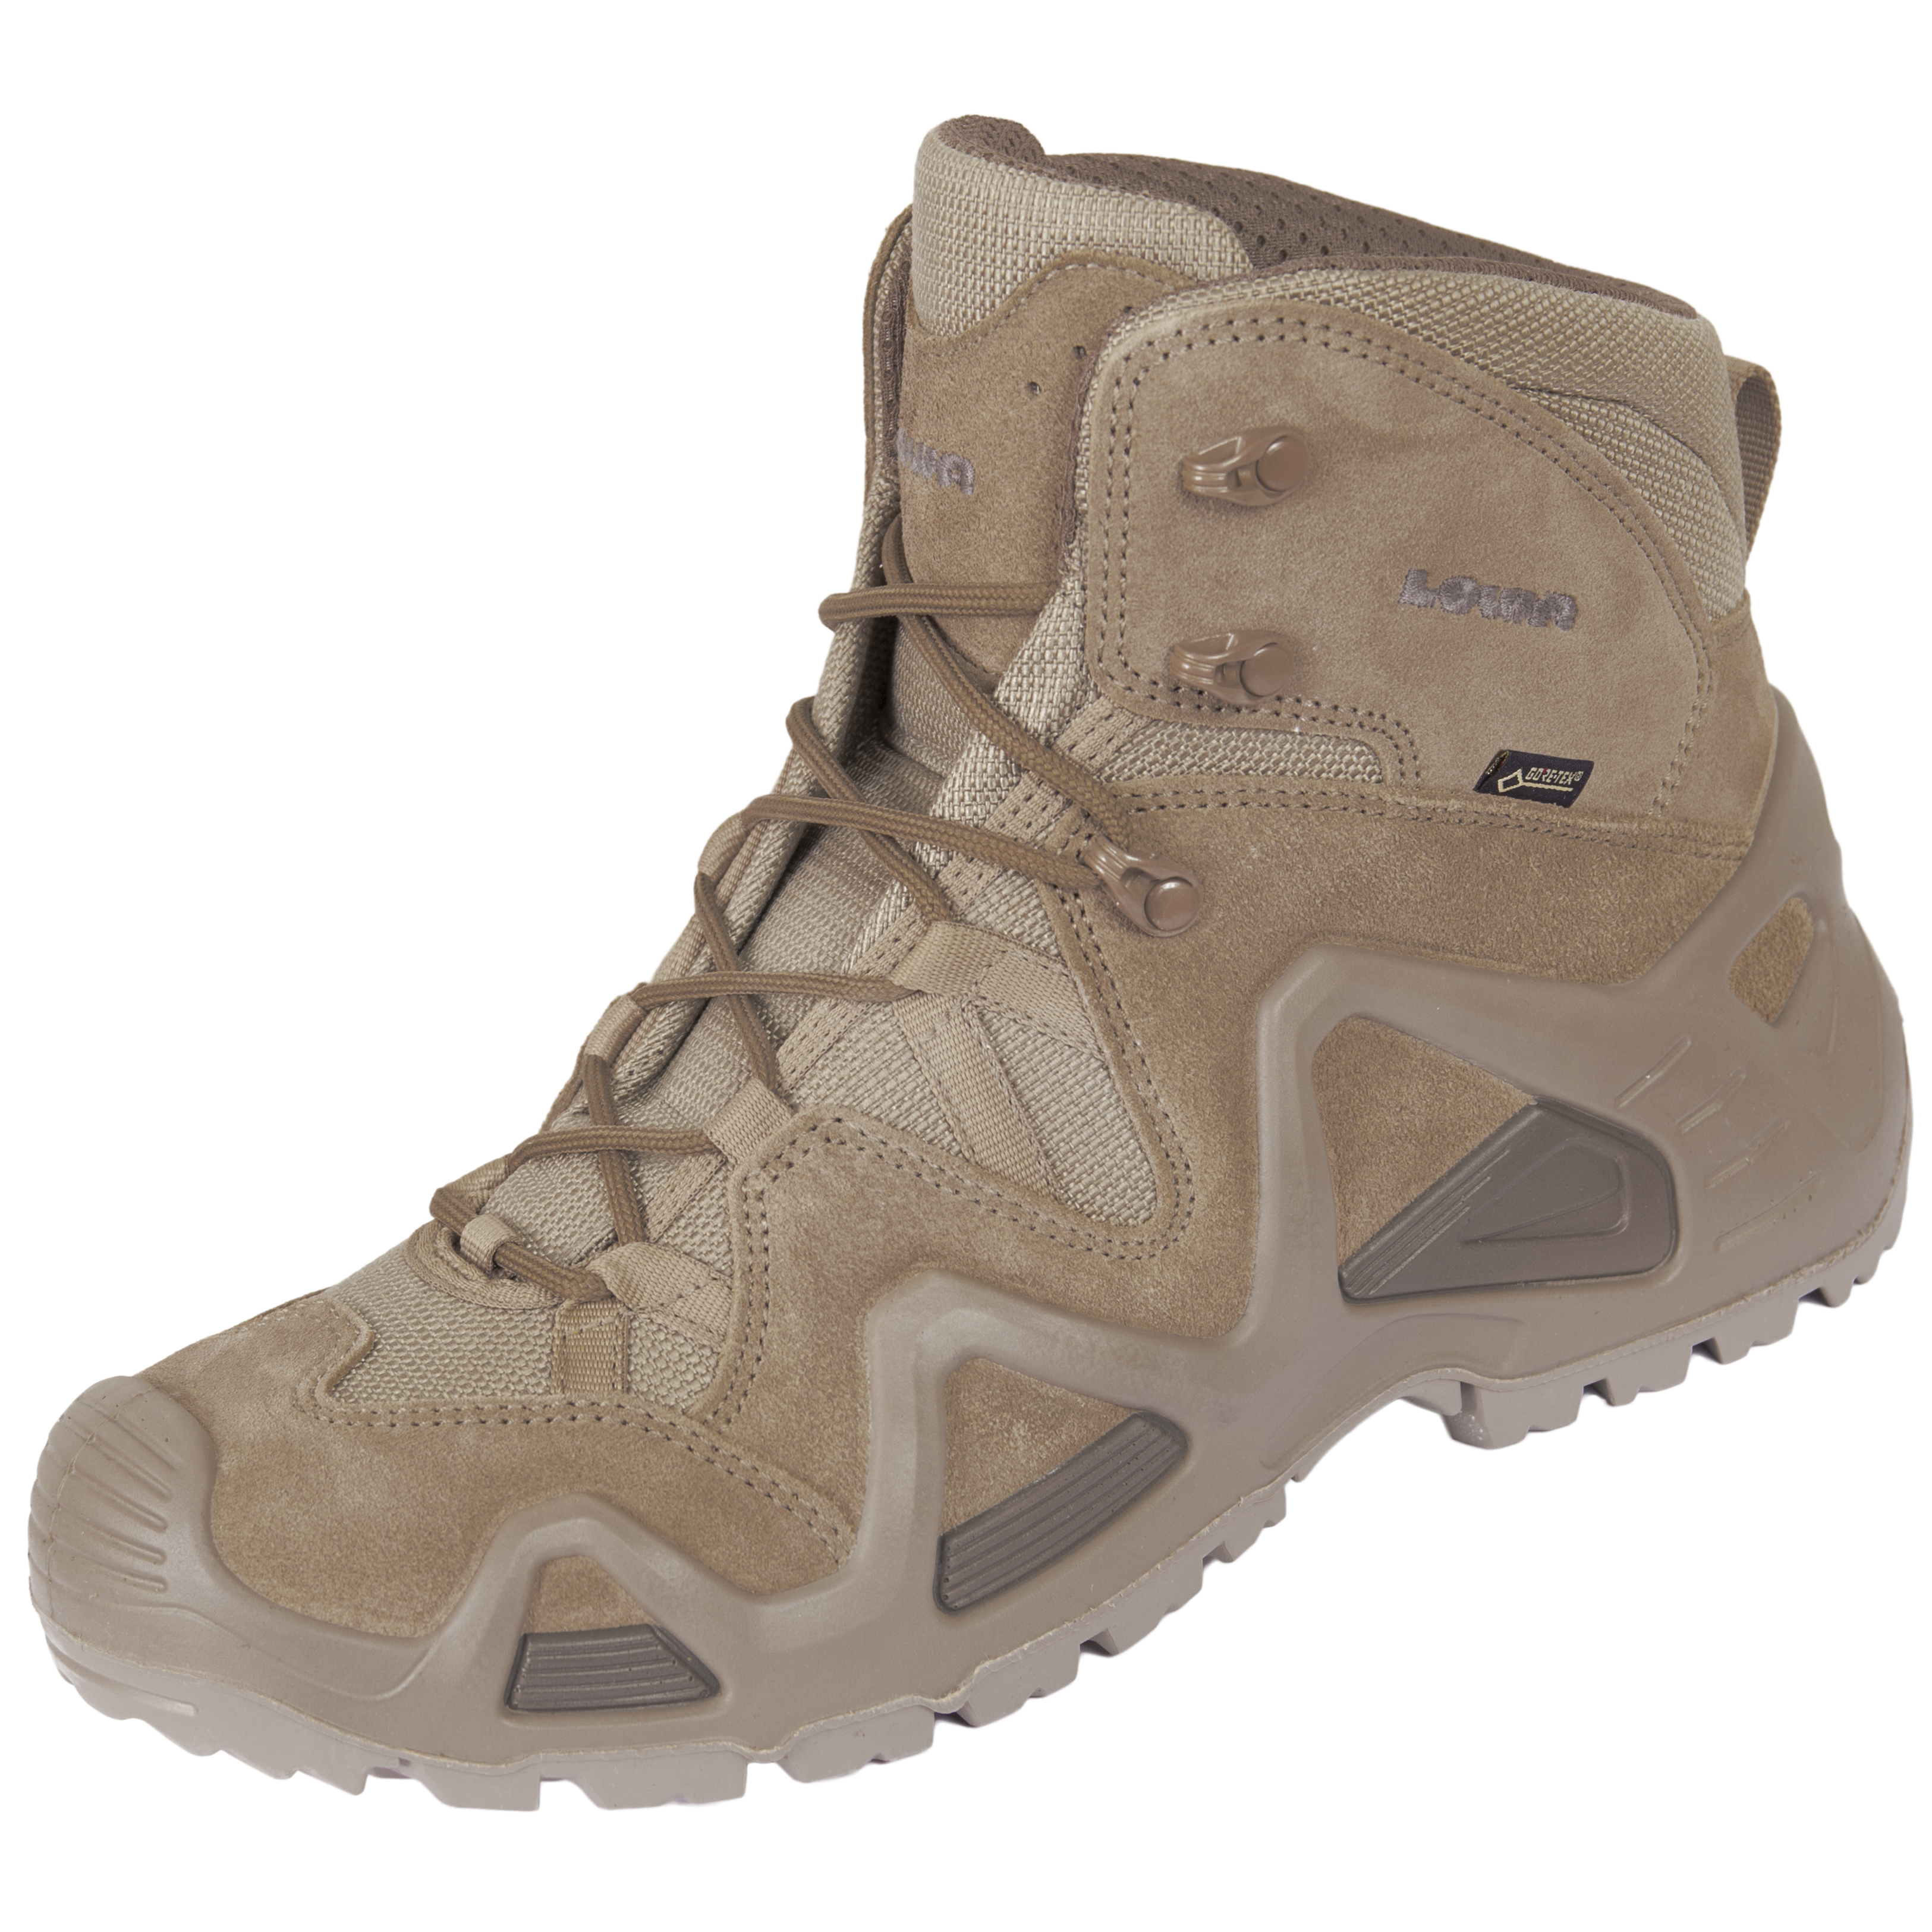 LOWA® Professional Tactical Military Outdoor Boots ZEPHYR GTX® MID TF-COYOTE New